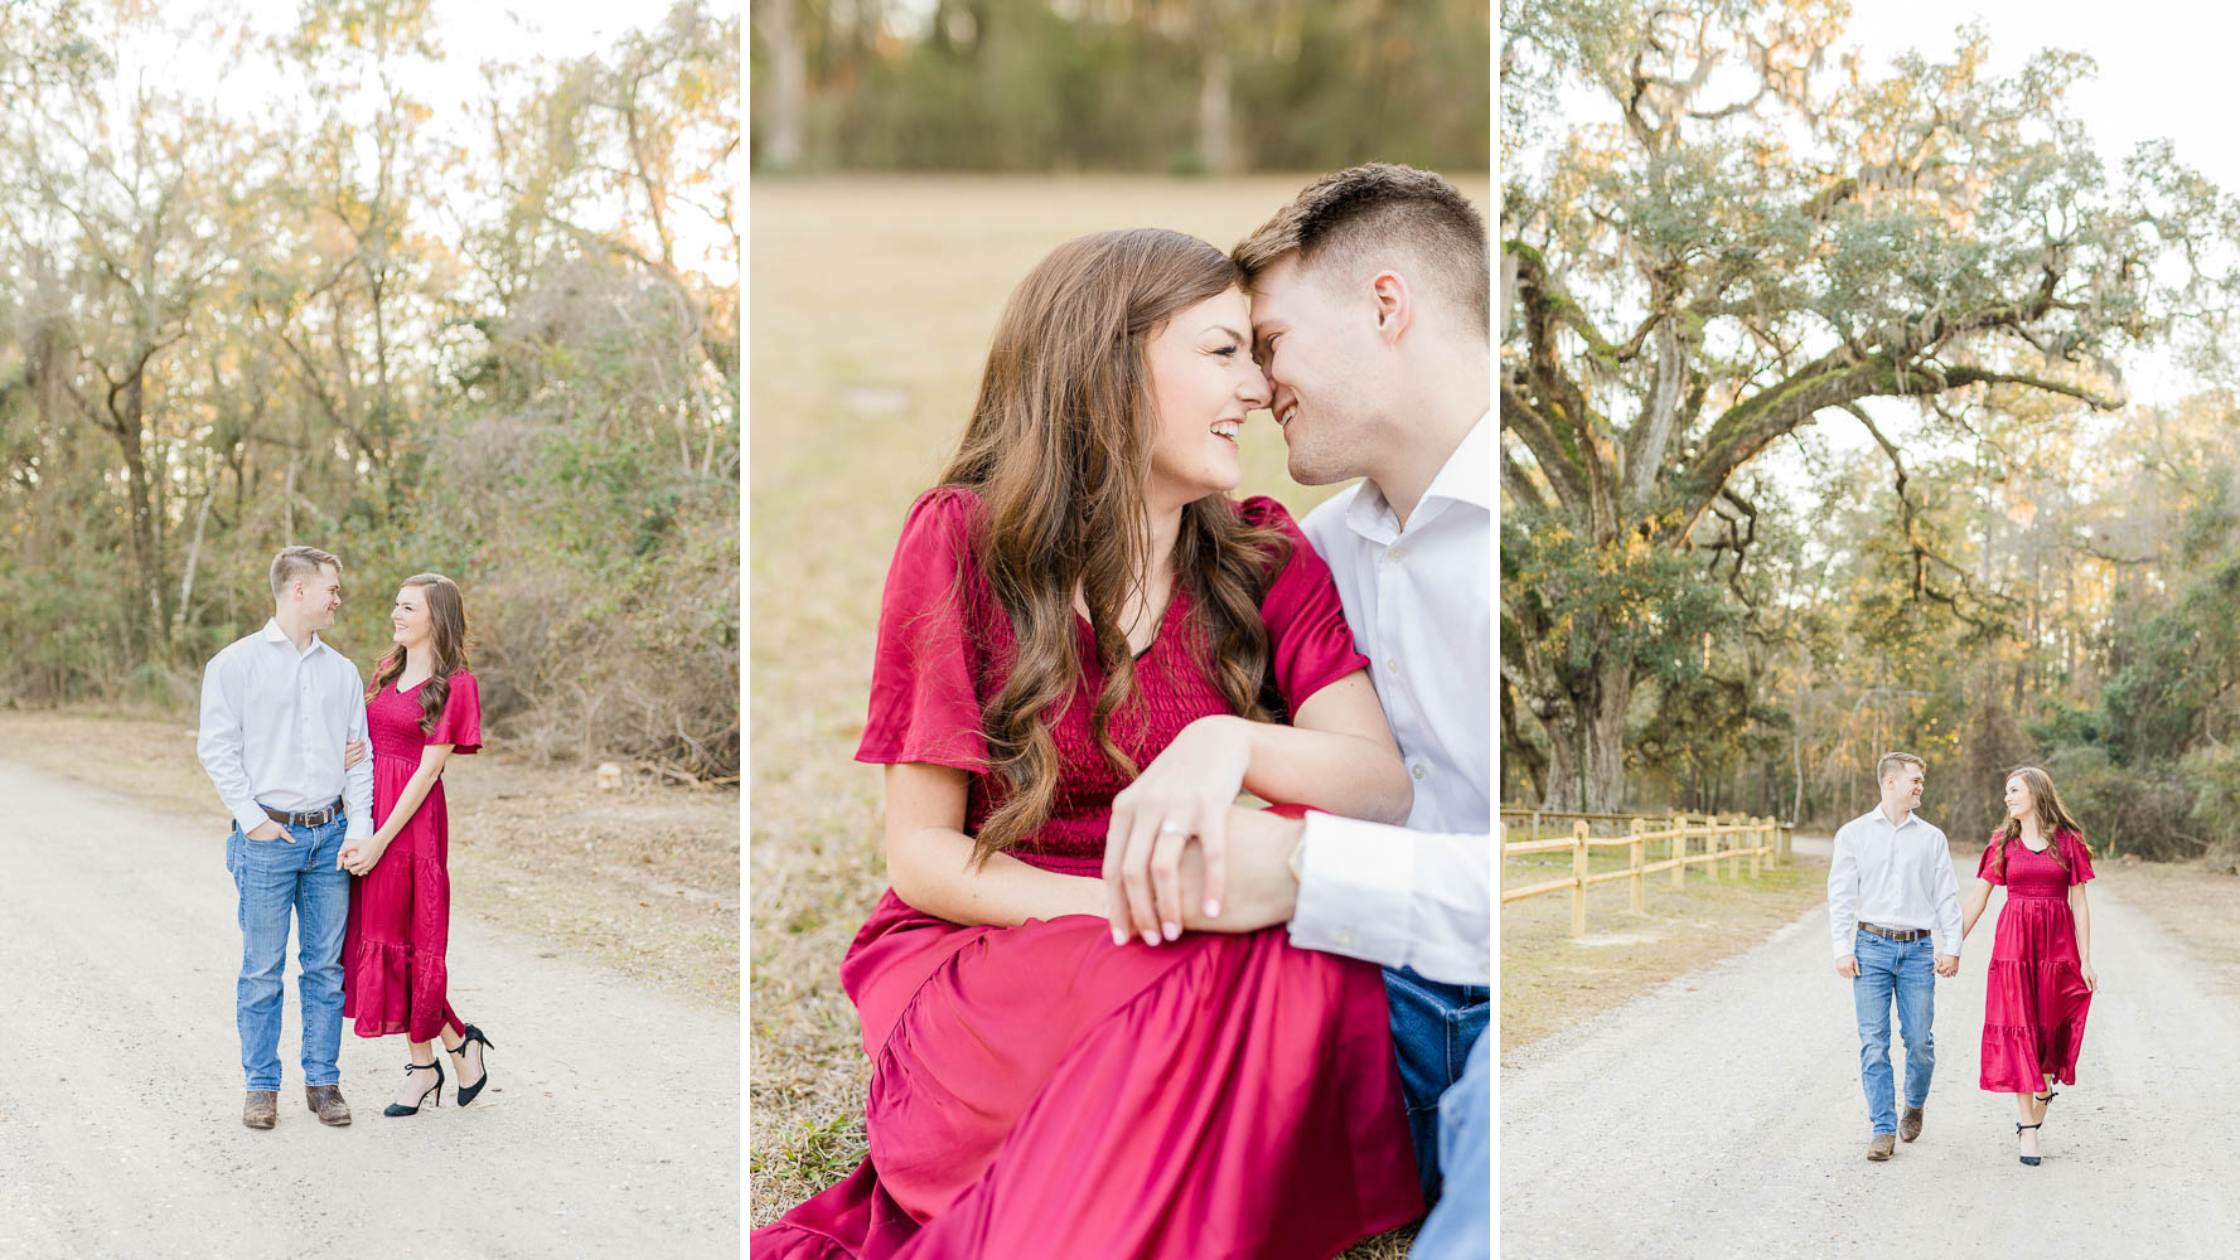 Blakely State Park Spanish Fort Alabama Engagement Session Photographed by Kristen Marcus Photography in February